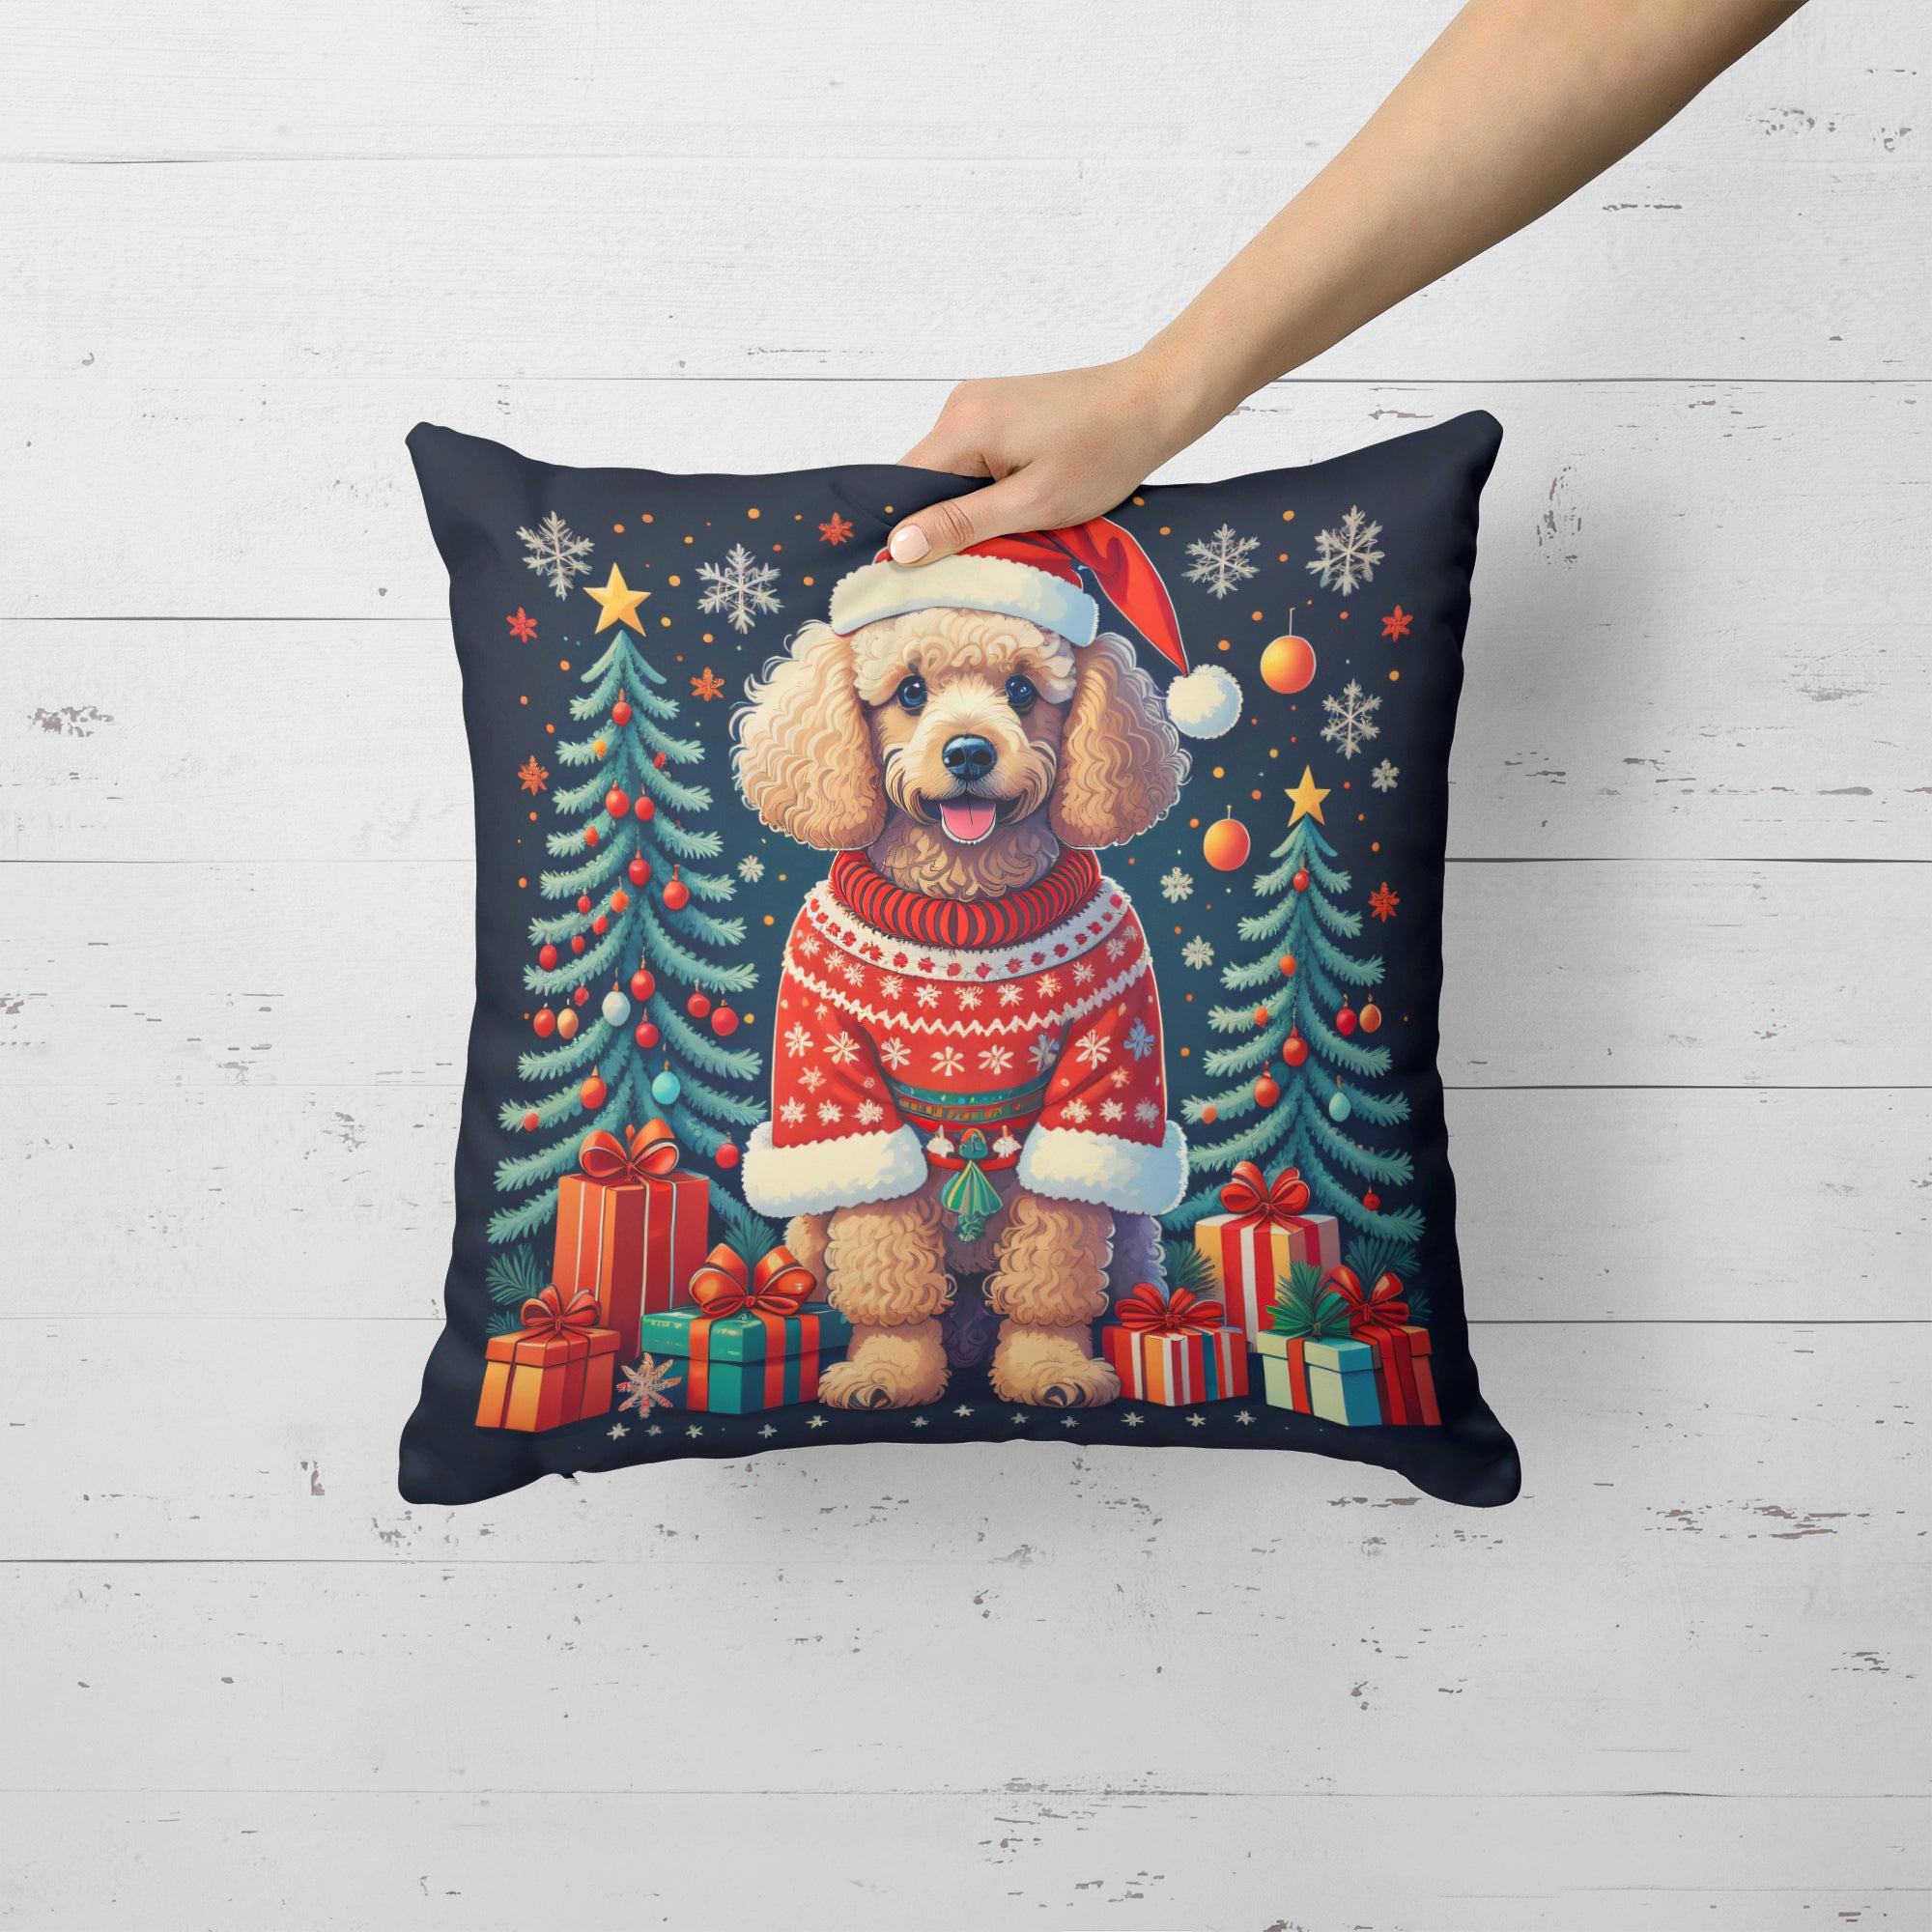 Buy this Apricot Toy Poodle Christmas Fabric Decorative Pillow